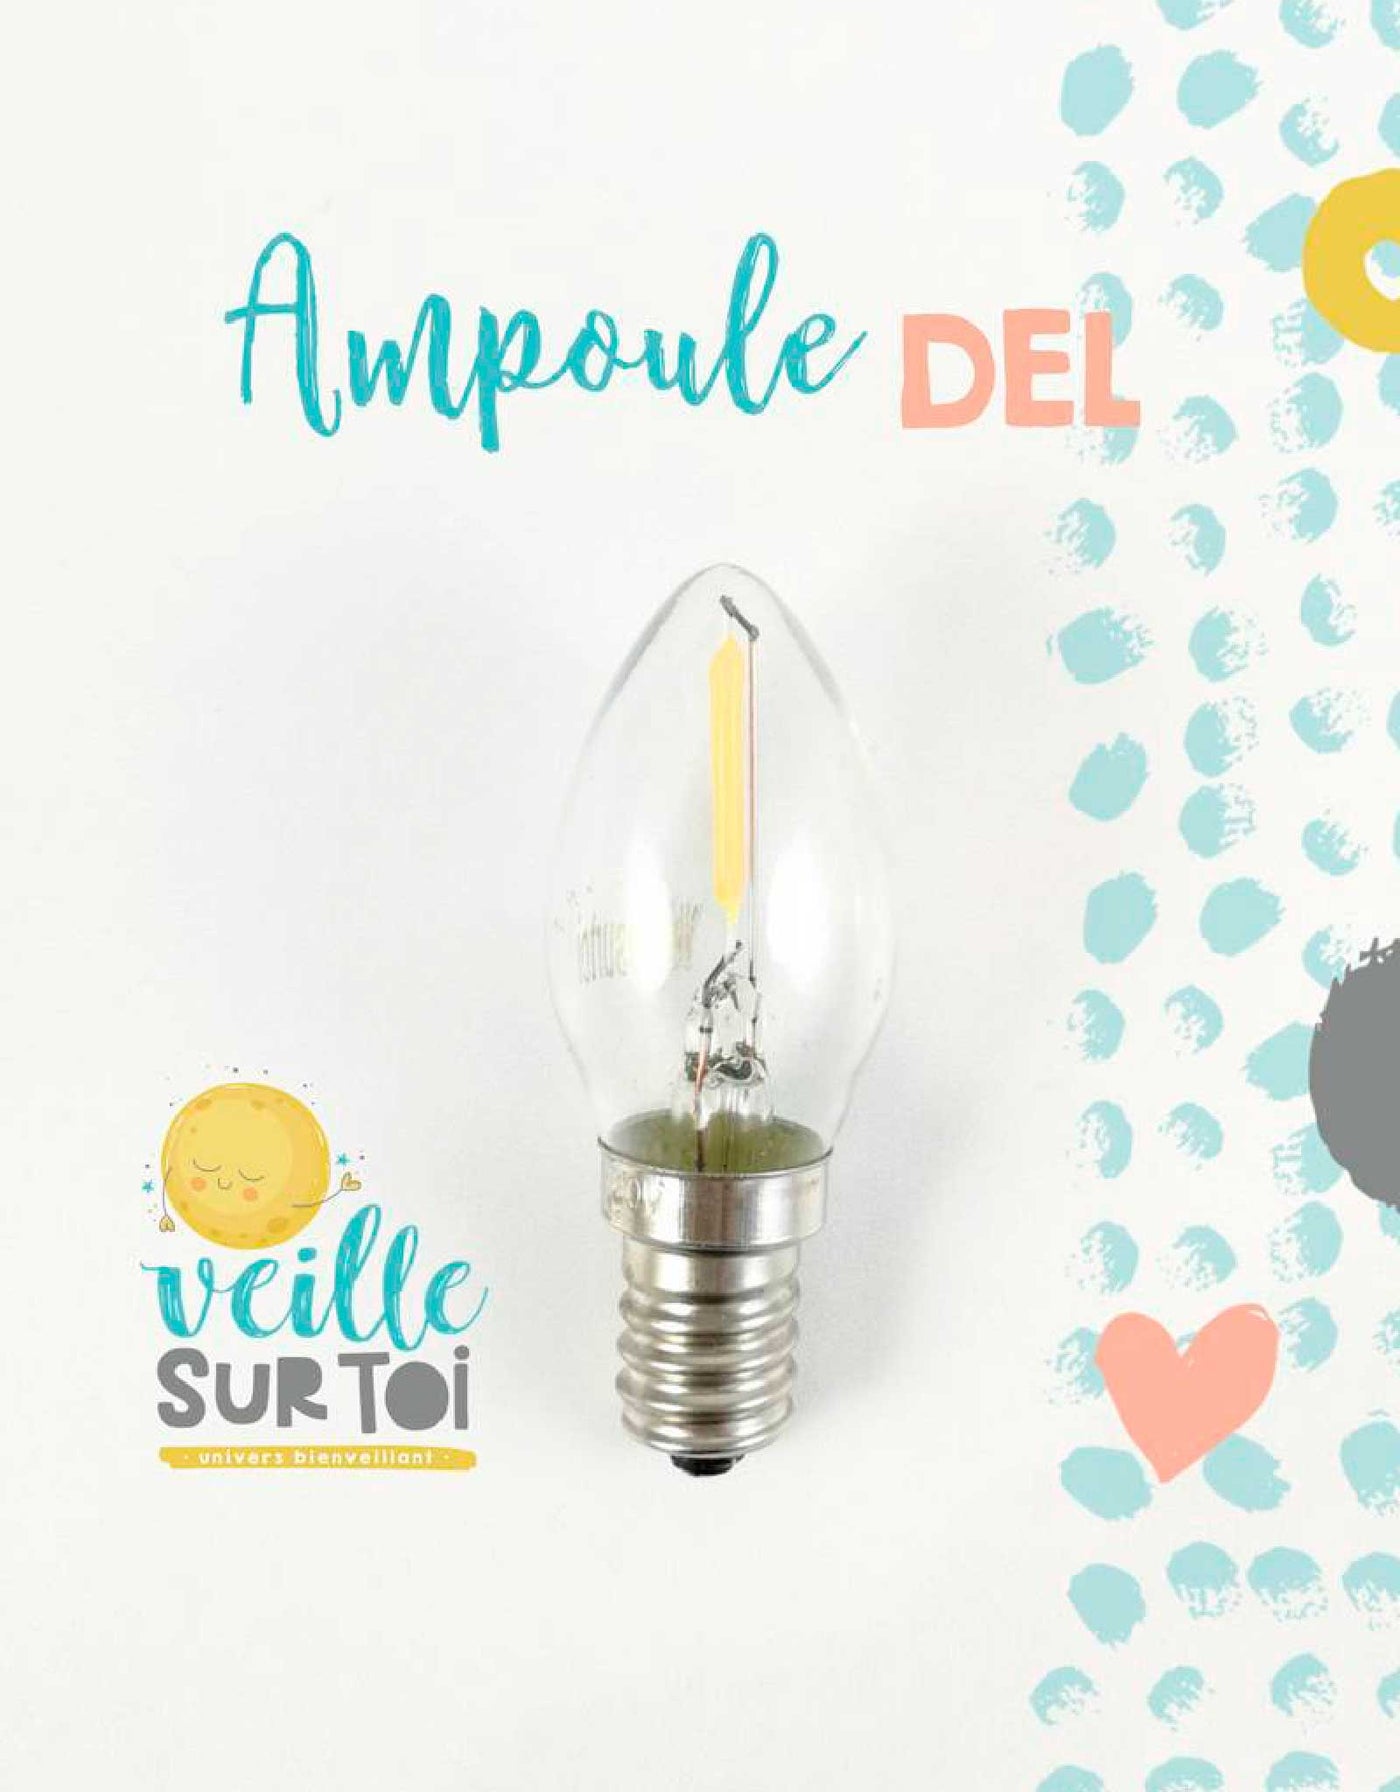 LED Bulb - Two intensity choices - Veille sur toi